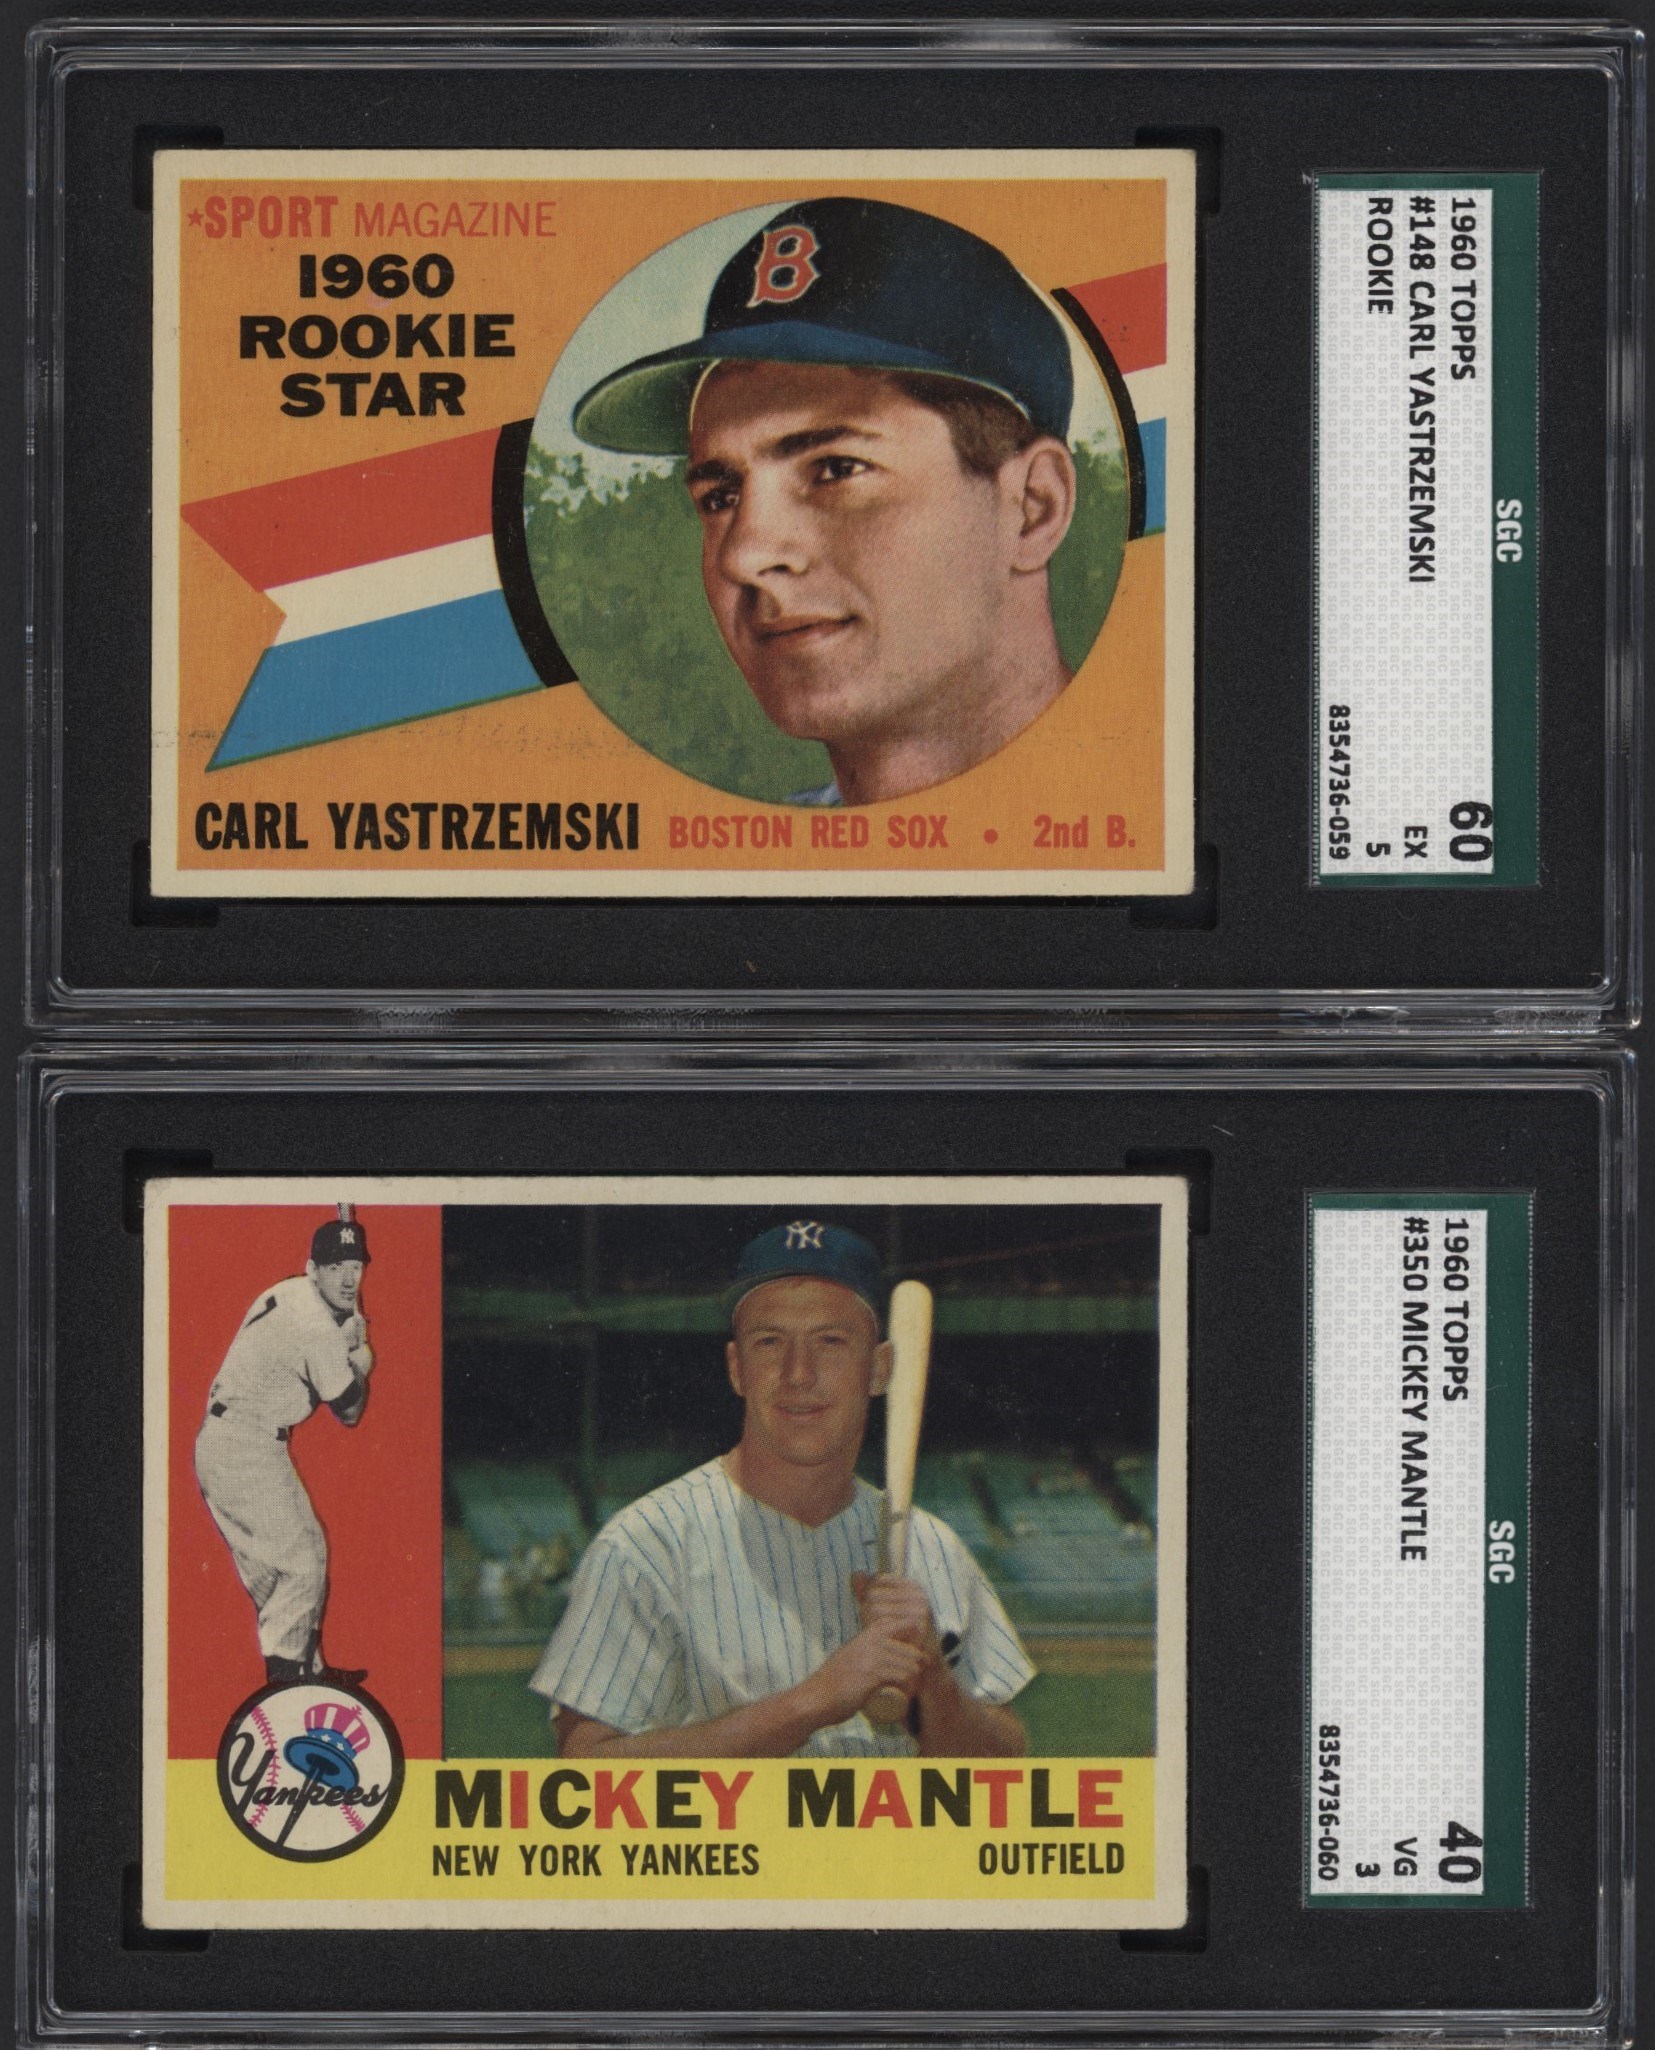 Baseball and Trading Cards - 1960 Topps Baseball Near-Complete Set w/SGC Graded Mantle & Yaz Rookie (557/572)